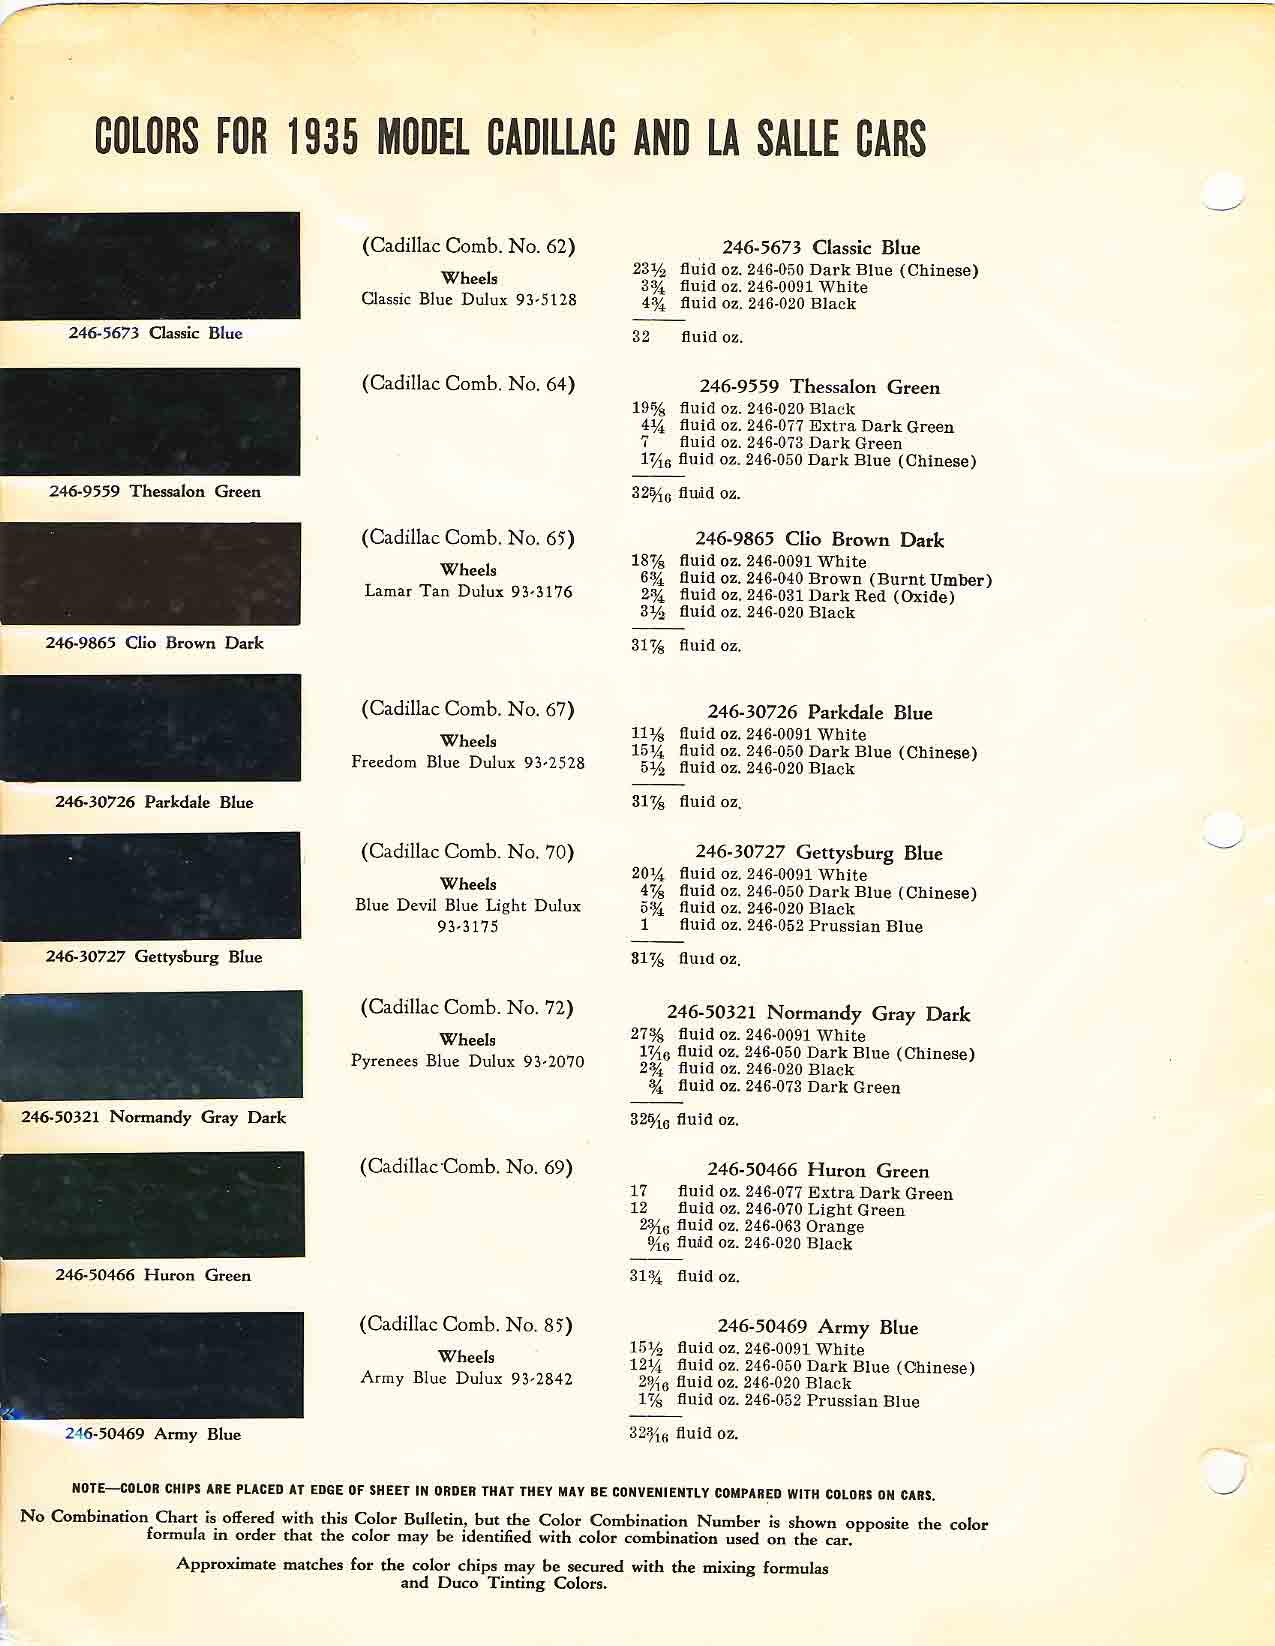 Colors and codes used on Cadillac Vehicles in 1935